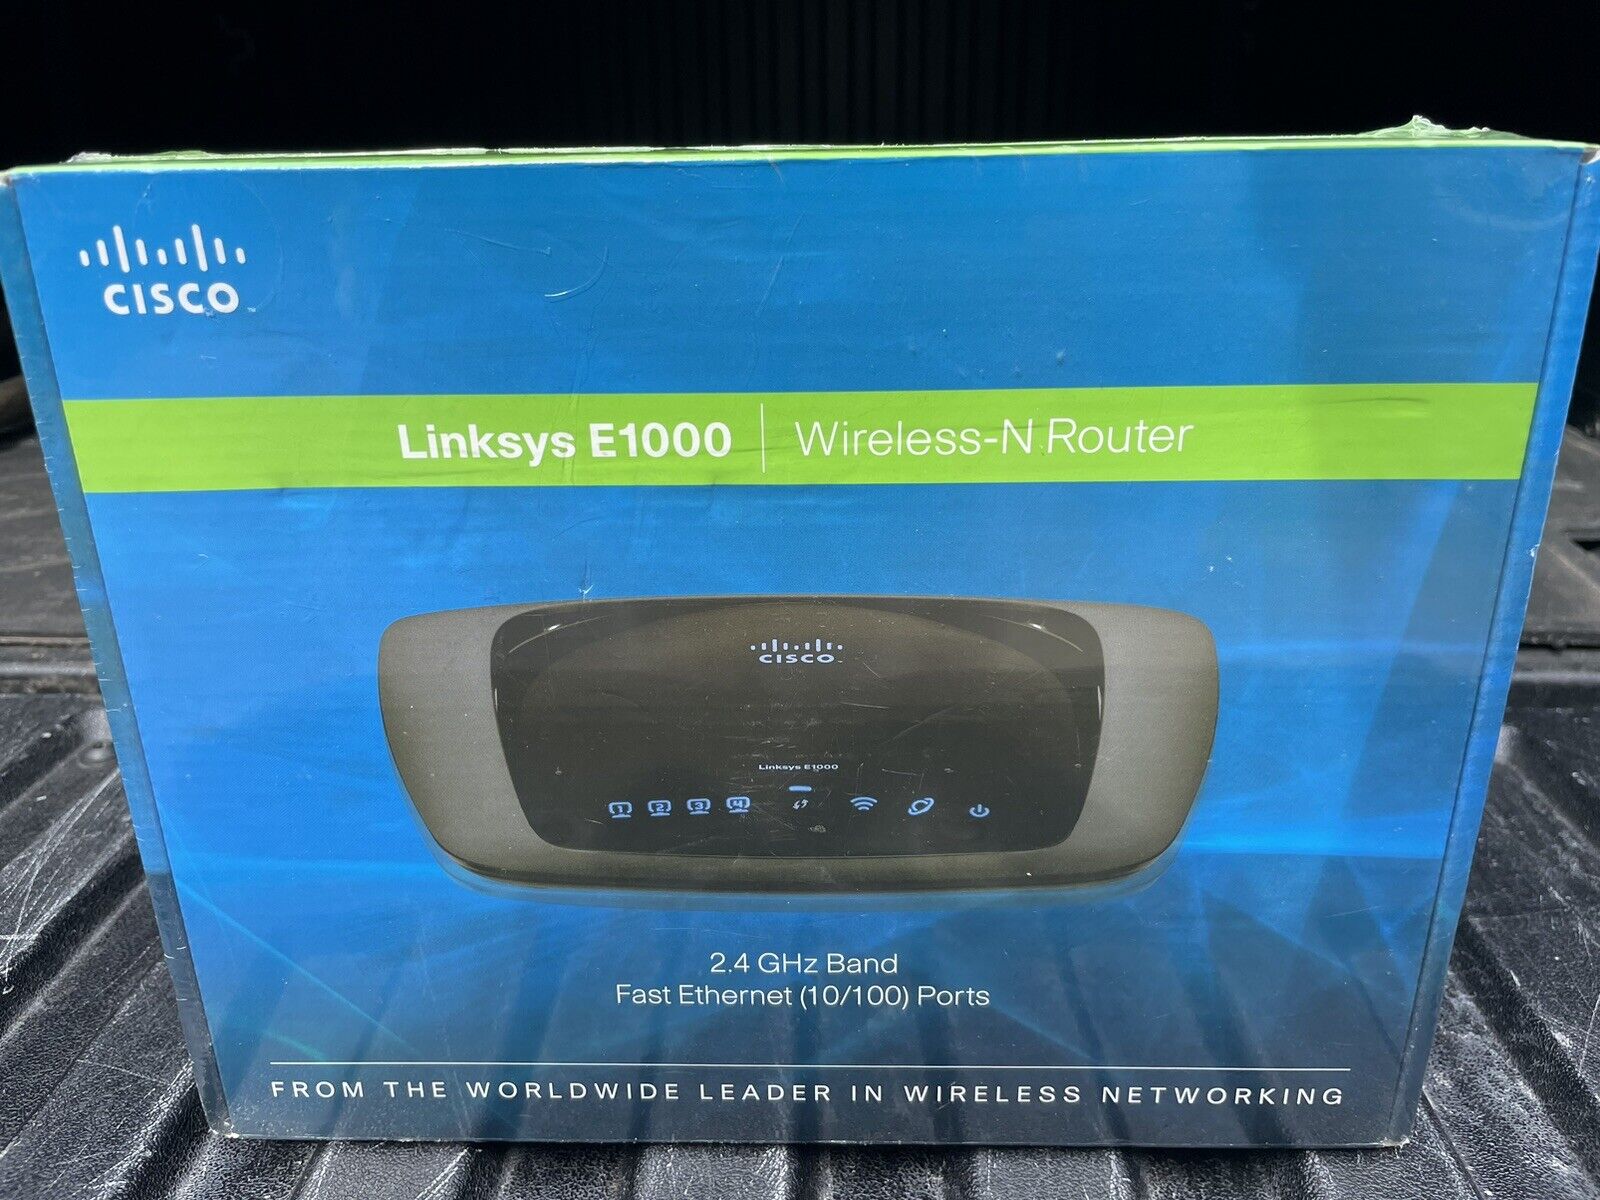 Linksys E1000 Wireless-N Router 2.4 GHz Band 300 Mbps